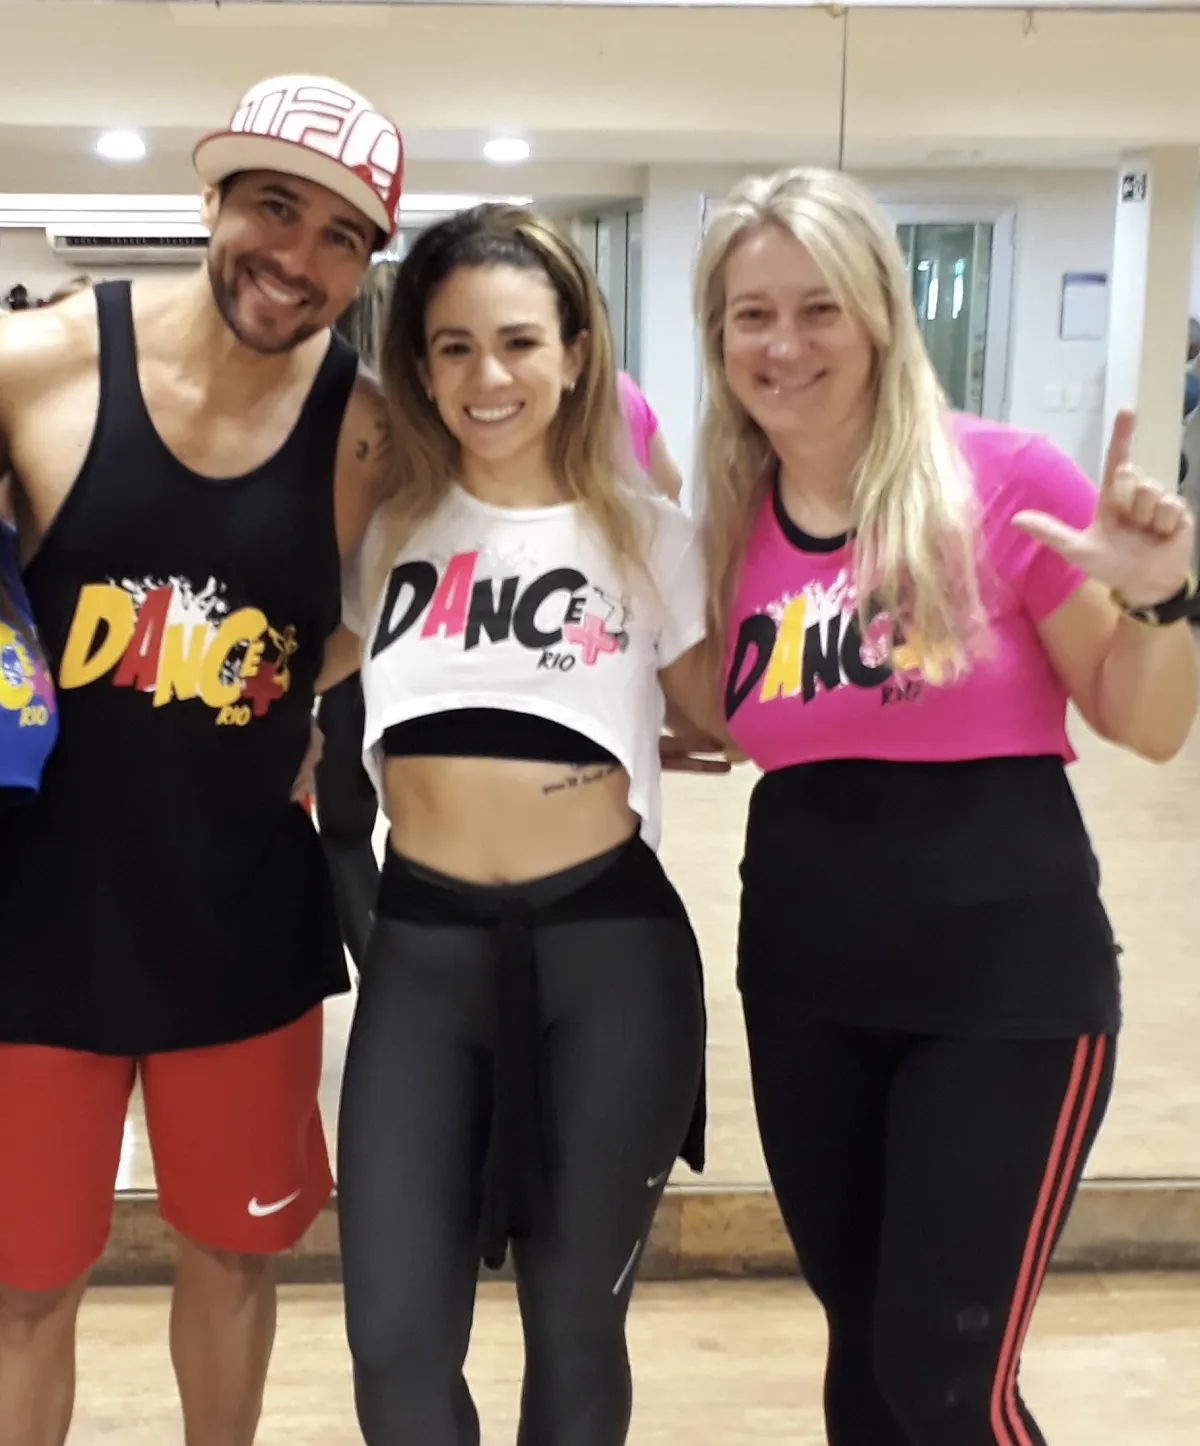 two women and a man smiling together after Brazilian dance fitness class